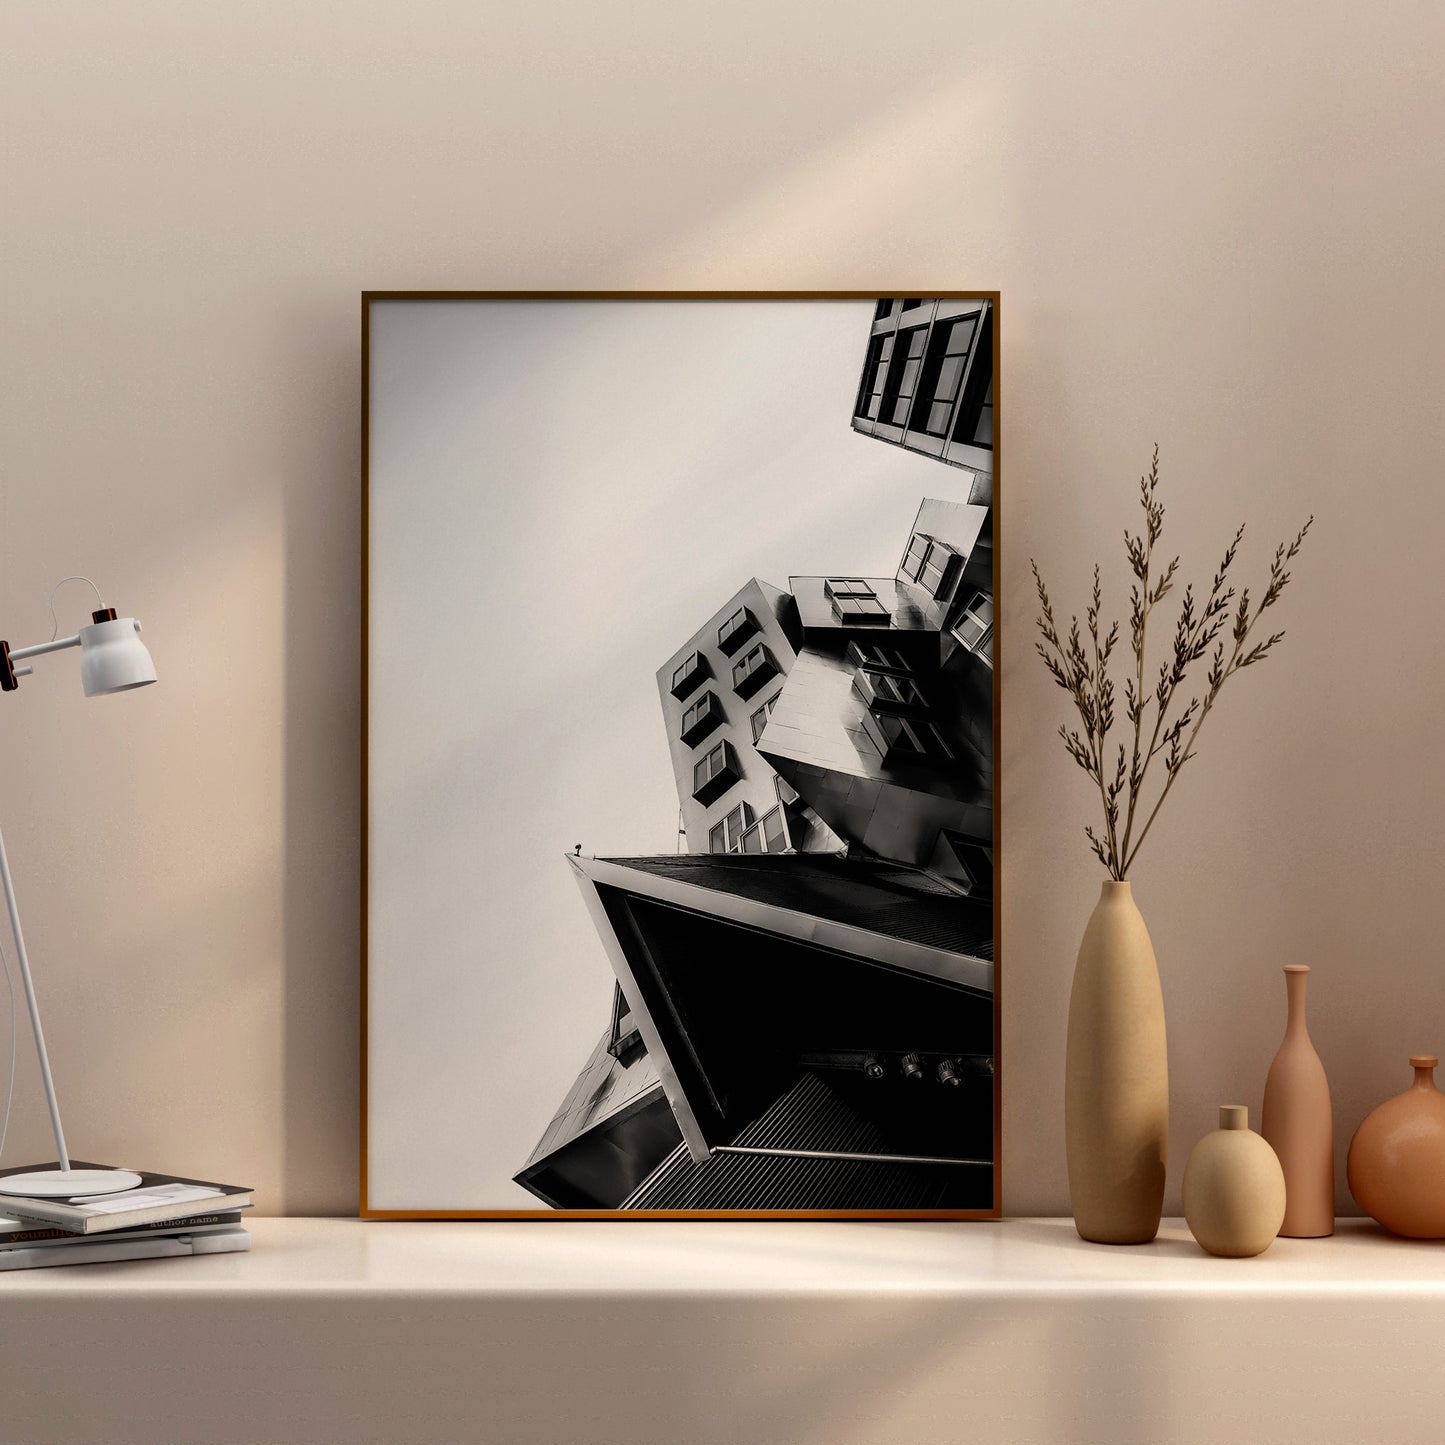 3Point Perspective Architectural Wall Art---